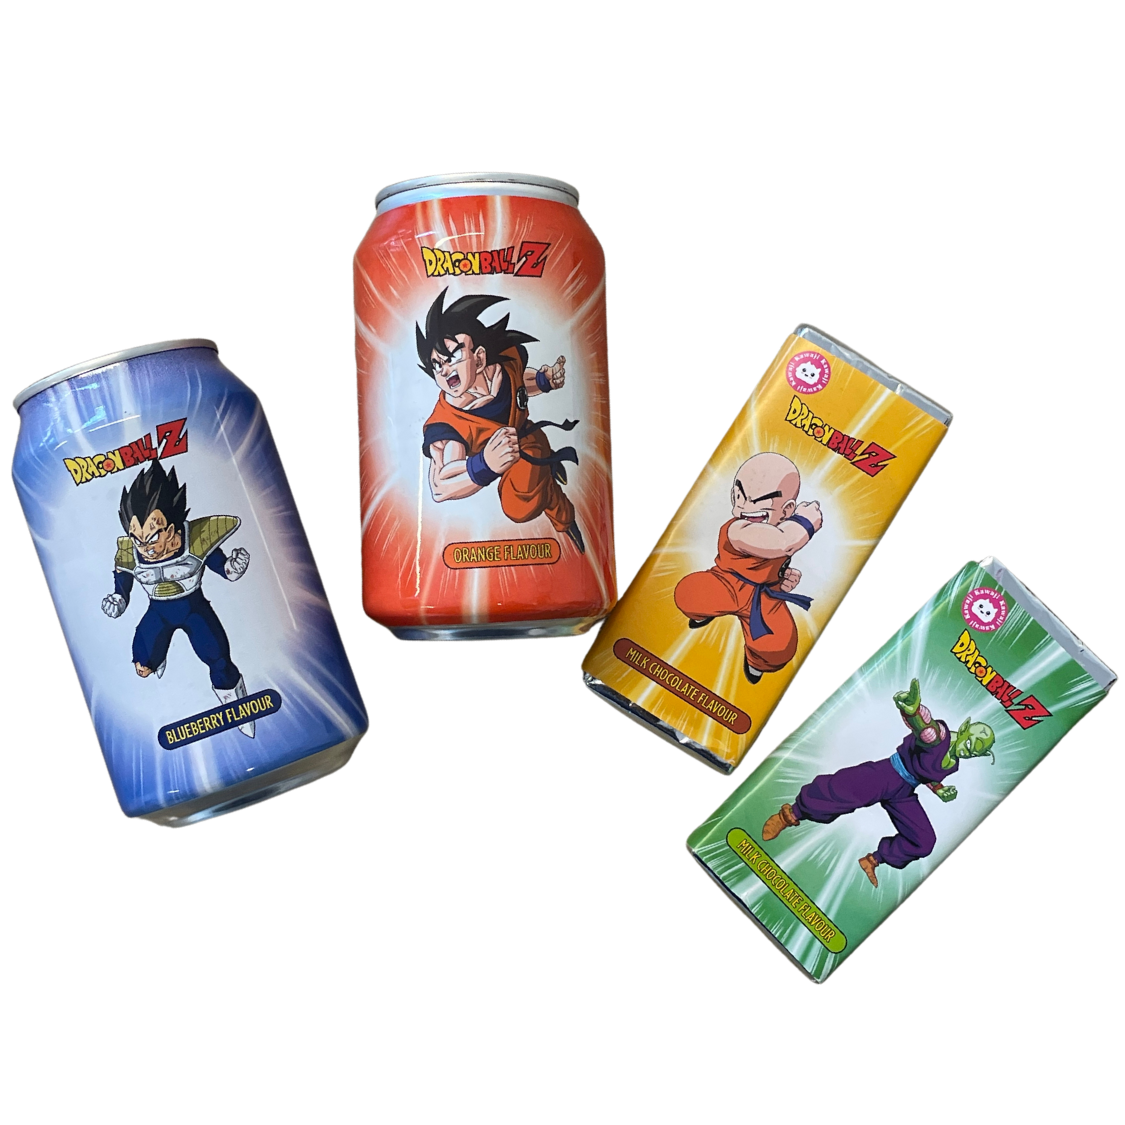 Dragonball Z Collectors Pack